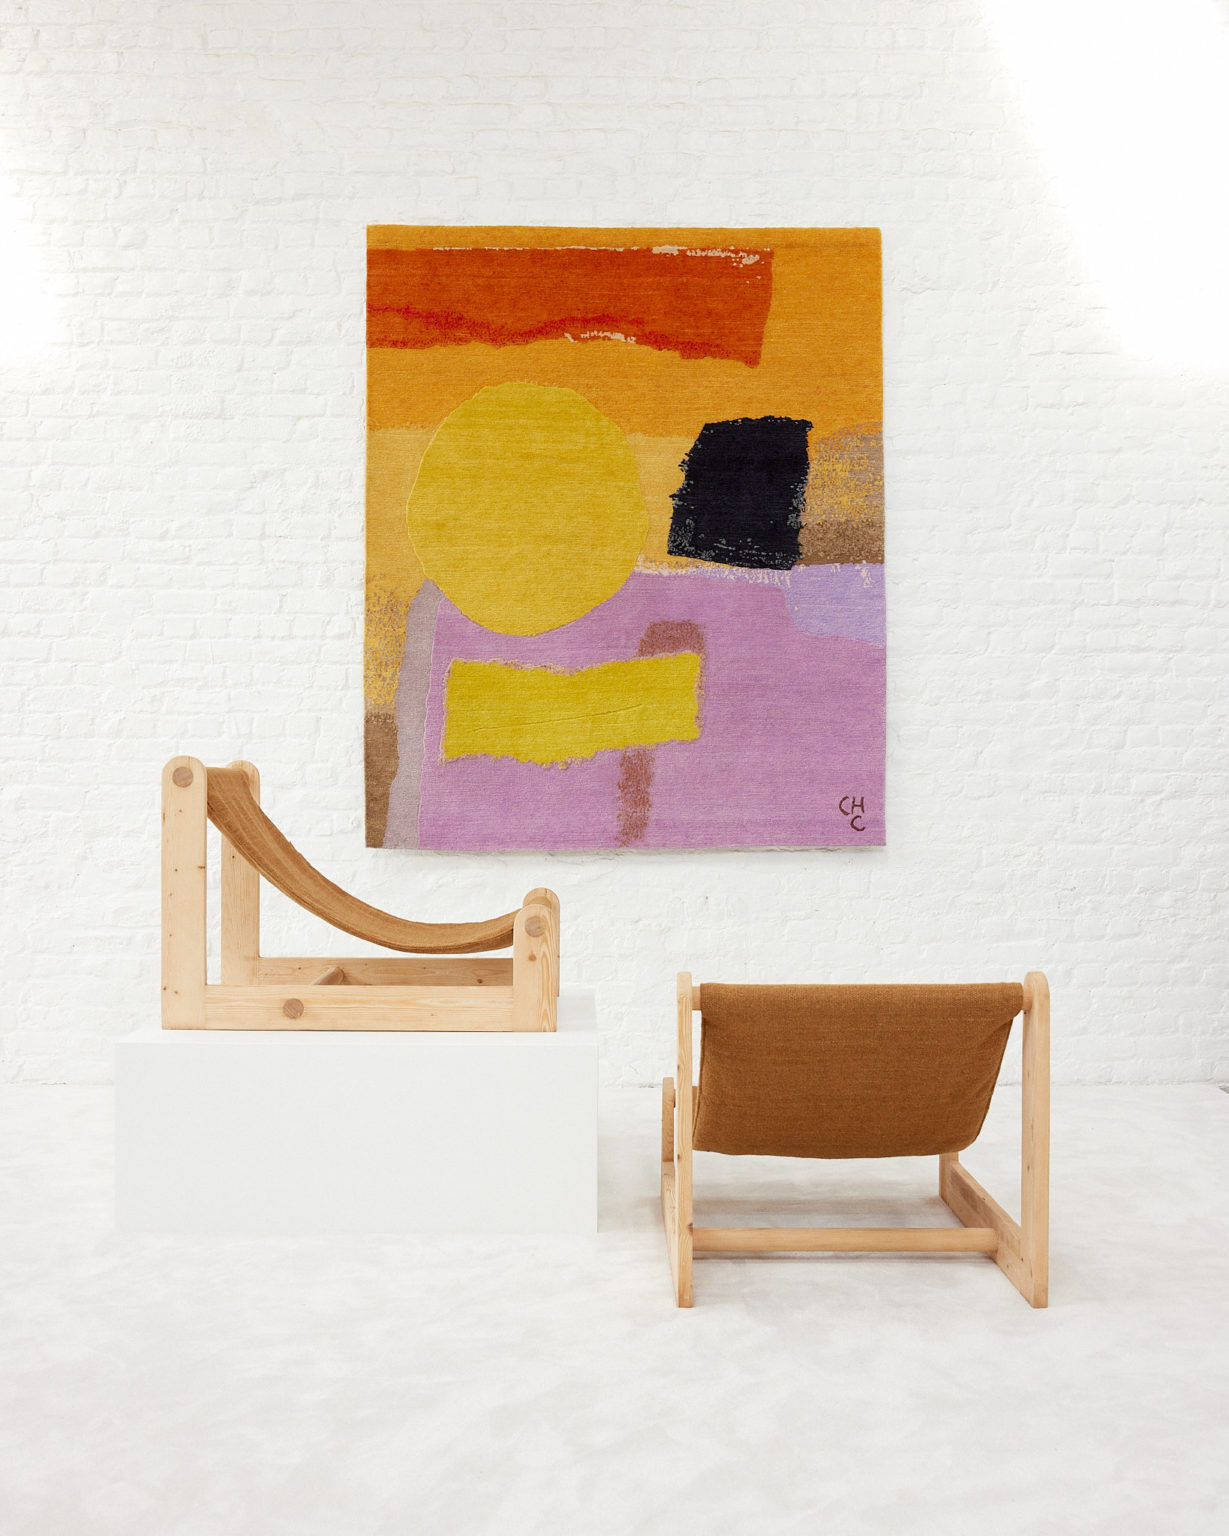 Wooden Lounge Chairs